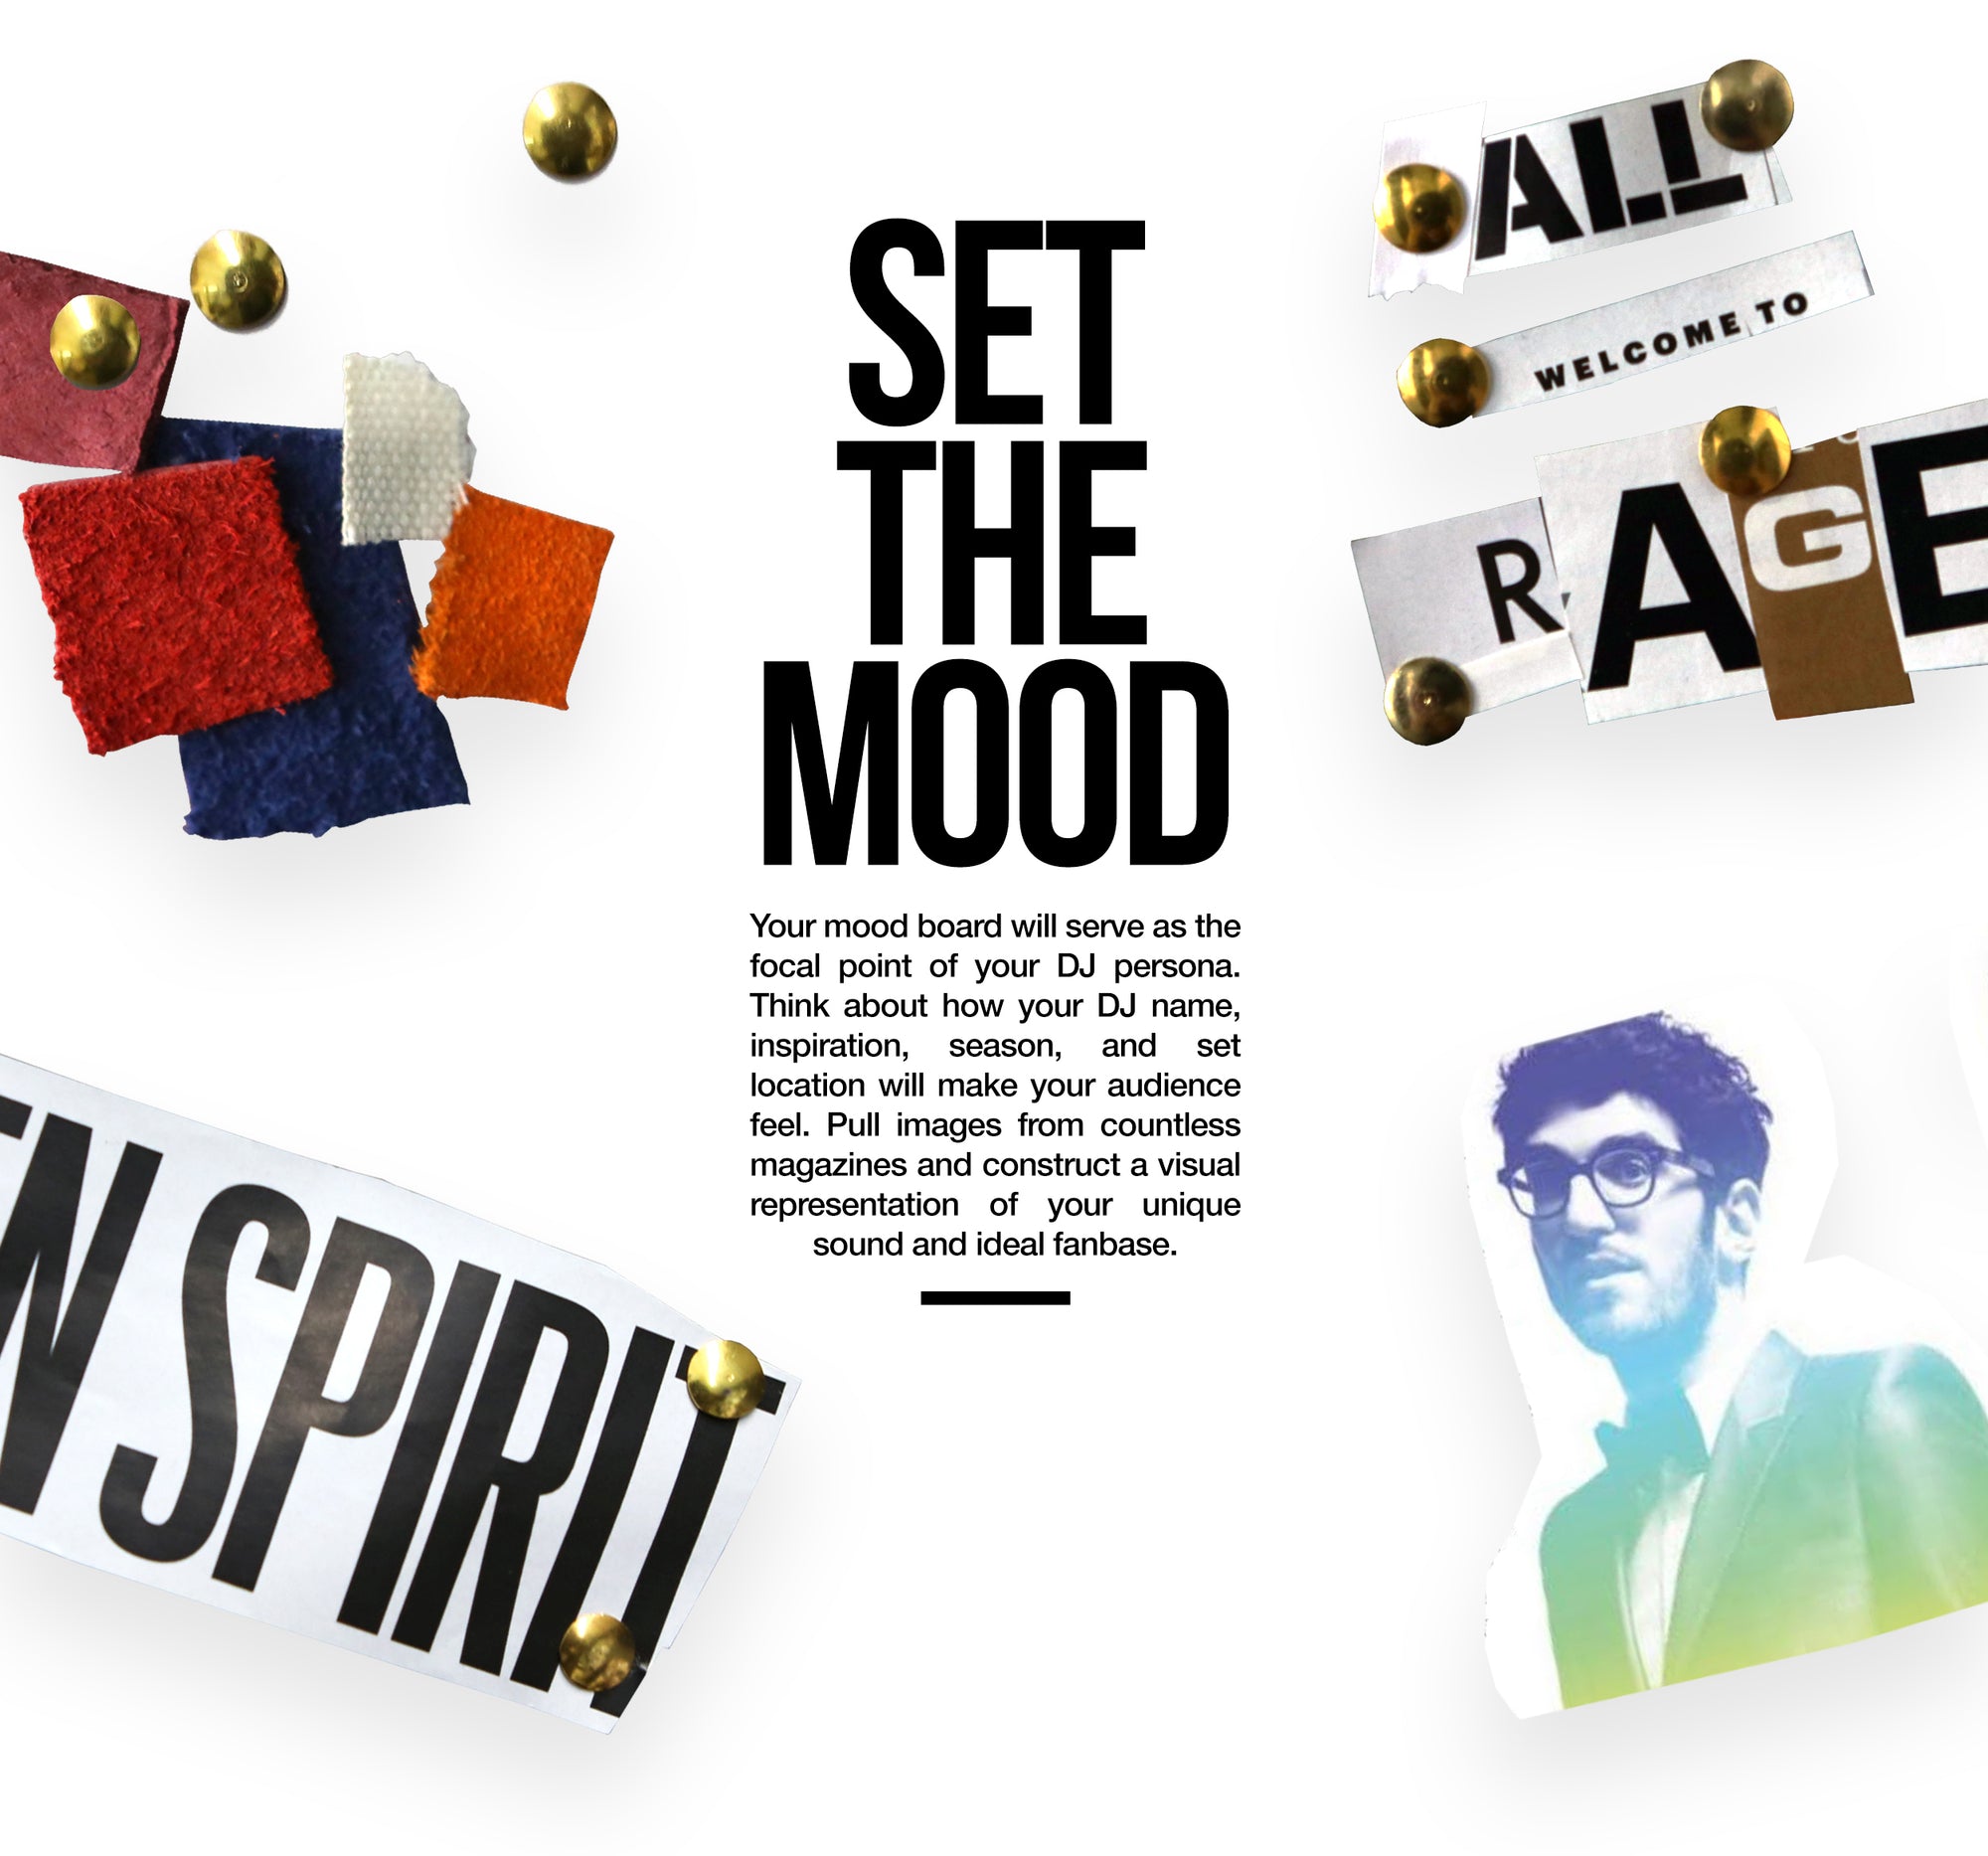 Set The Mood Your mood board will serve as the focal point of your DJ persona. Think about how your DJ name, inspiration, season, and set location will make your audience feel. Pull images from countless magazines and construct a visual representation of 